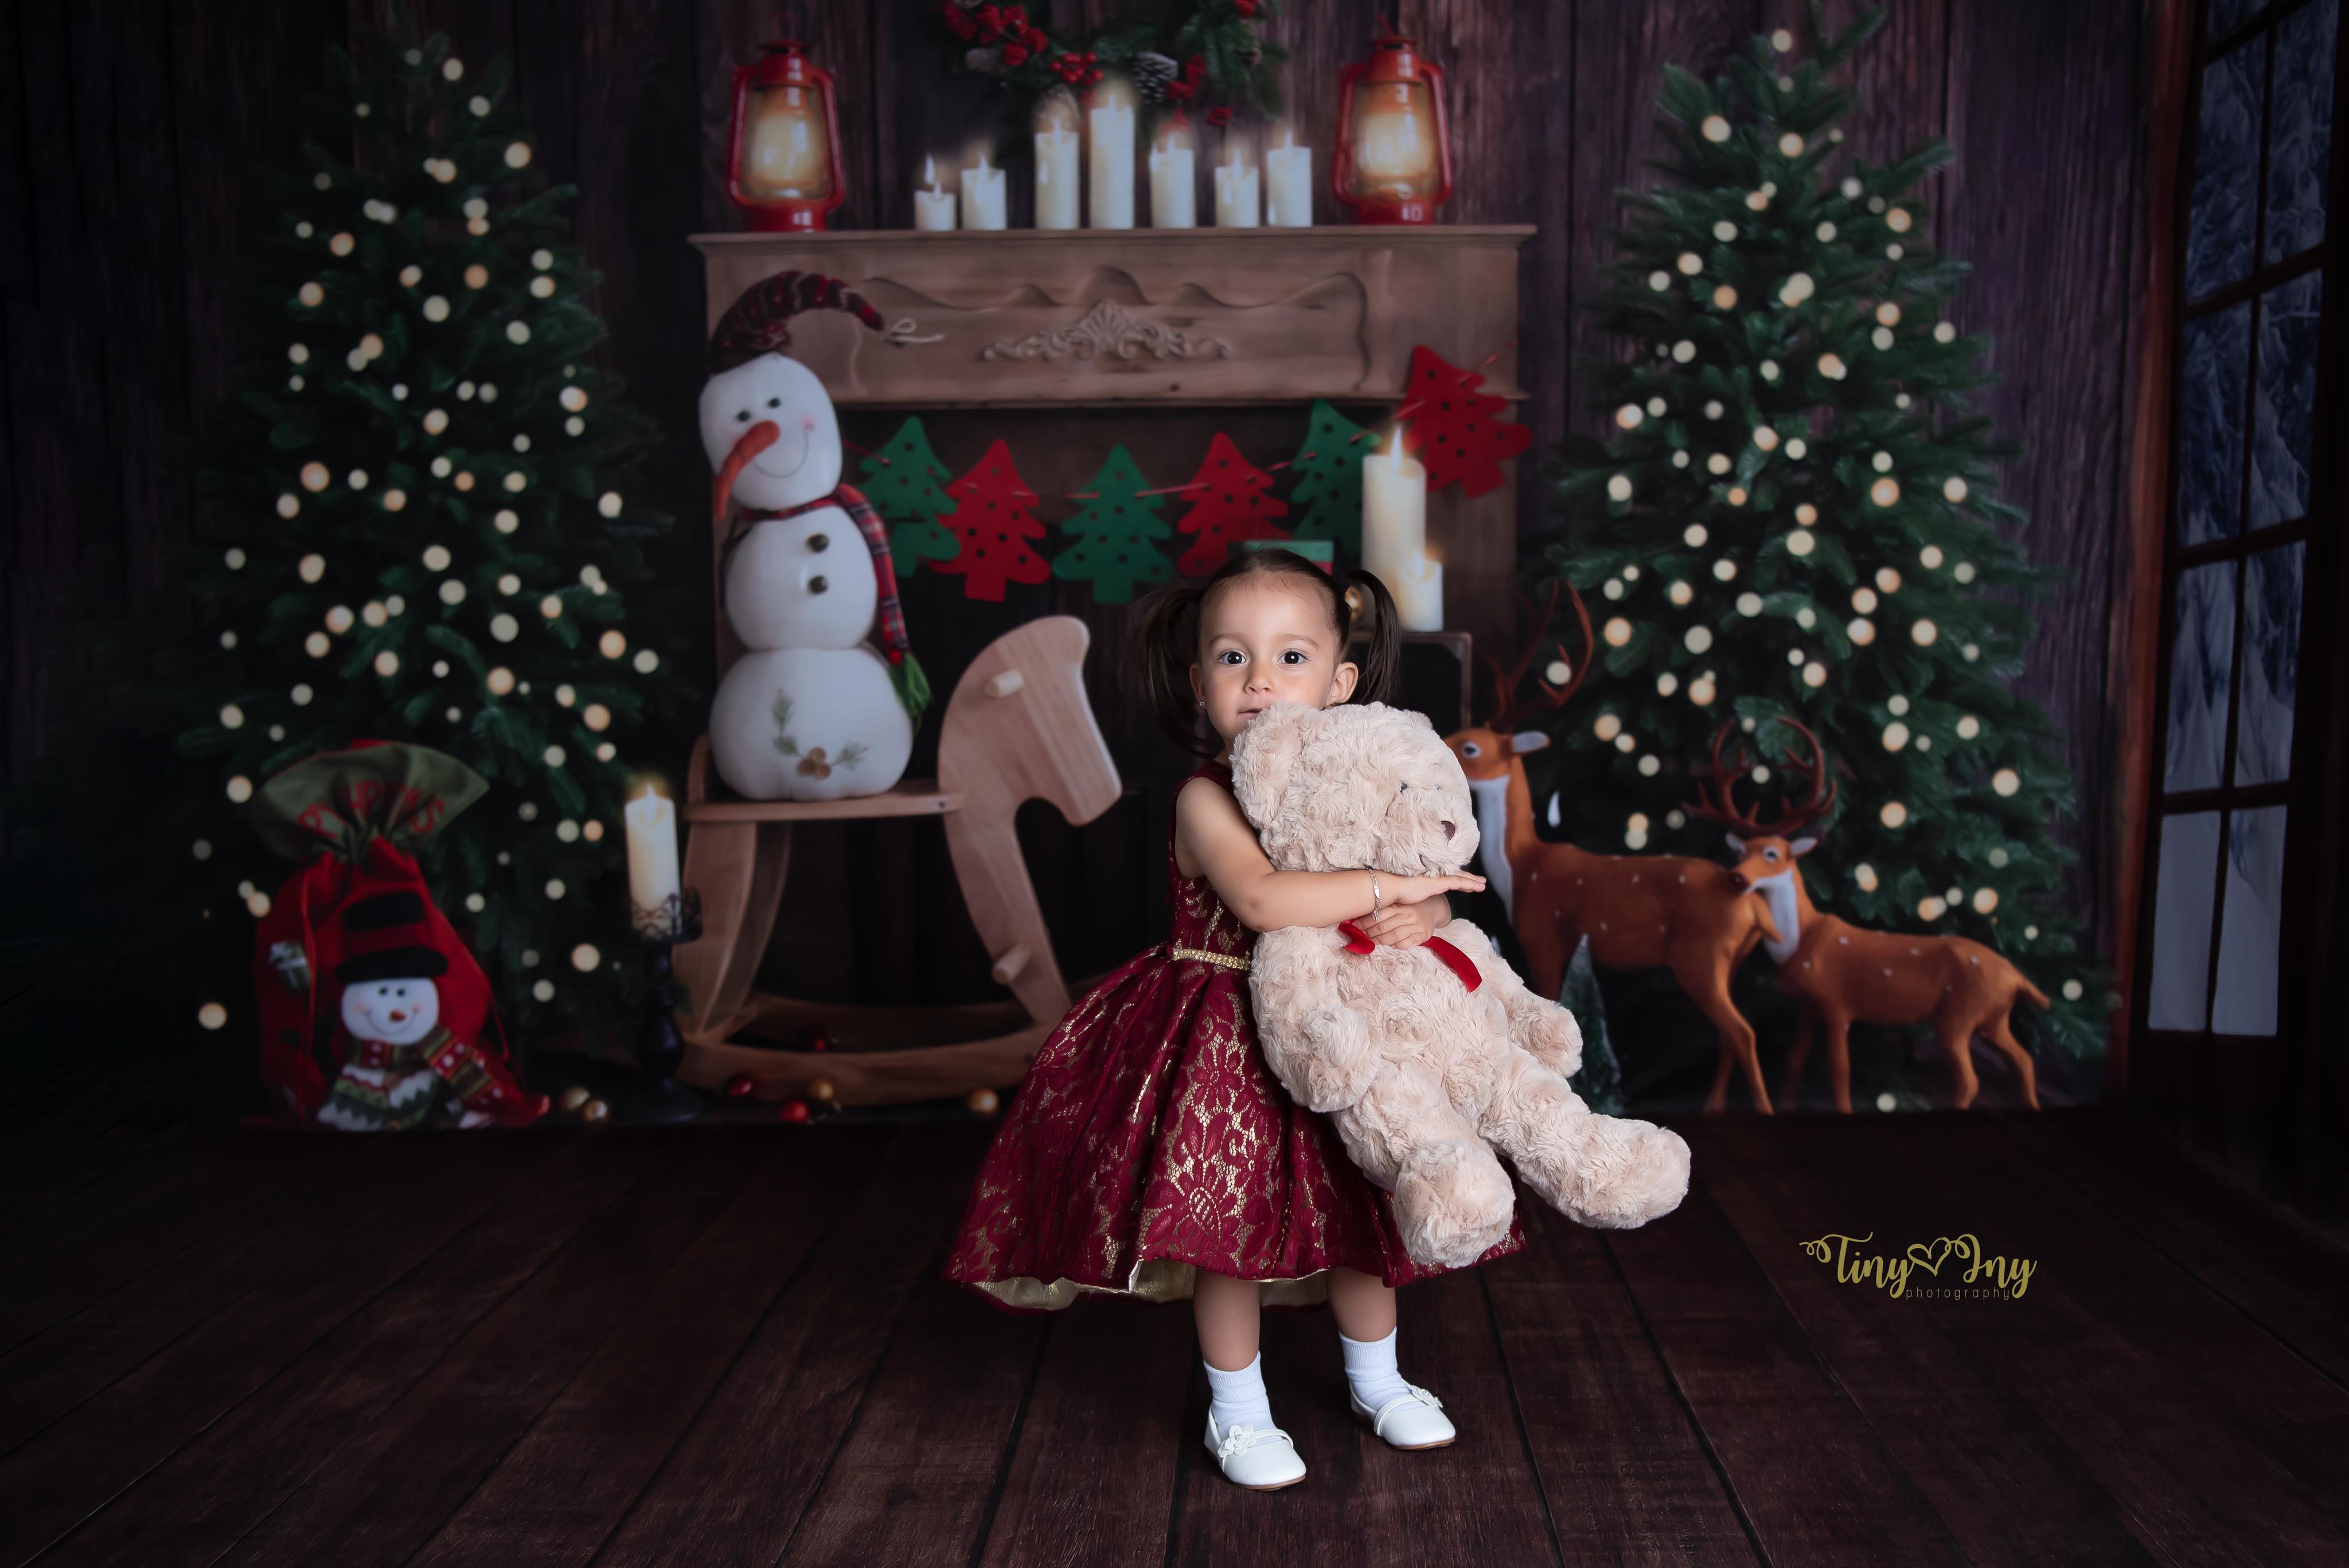 Kate Christmas Room with Elk Snowman Decorations Backdrop Designed by Emetselch